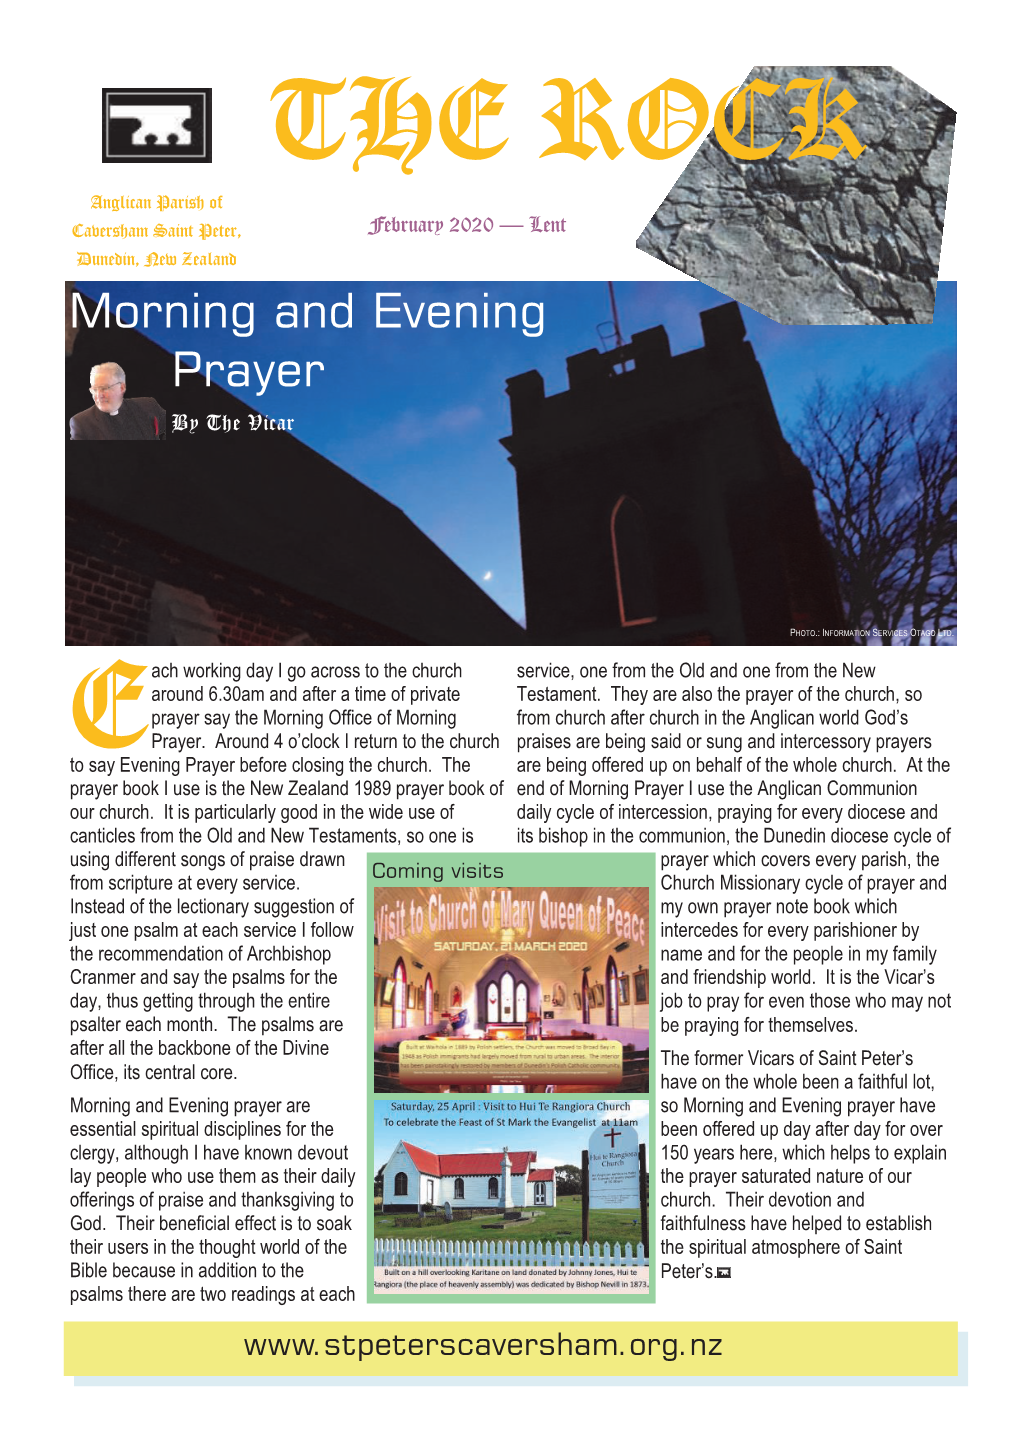 Morning and Evening Prayer by the Vicar